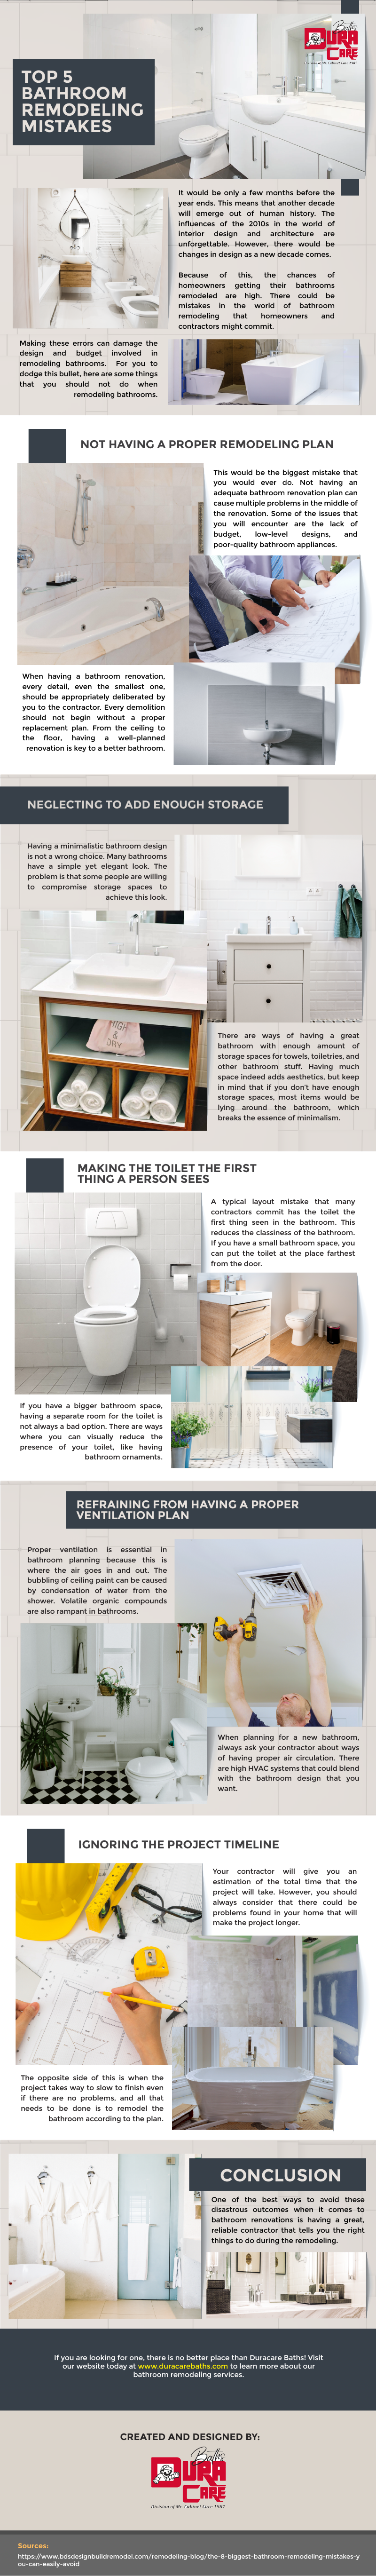 Top 5 Bathroom Remodeling Mistakes-01 - Copy infographic